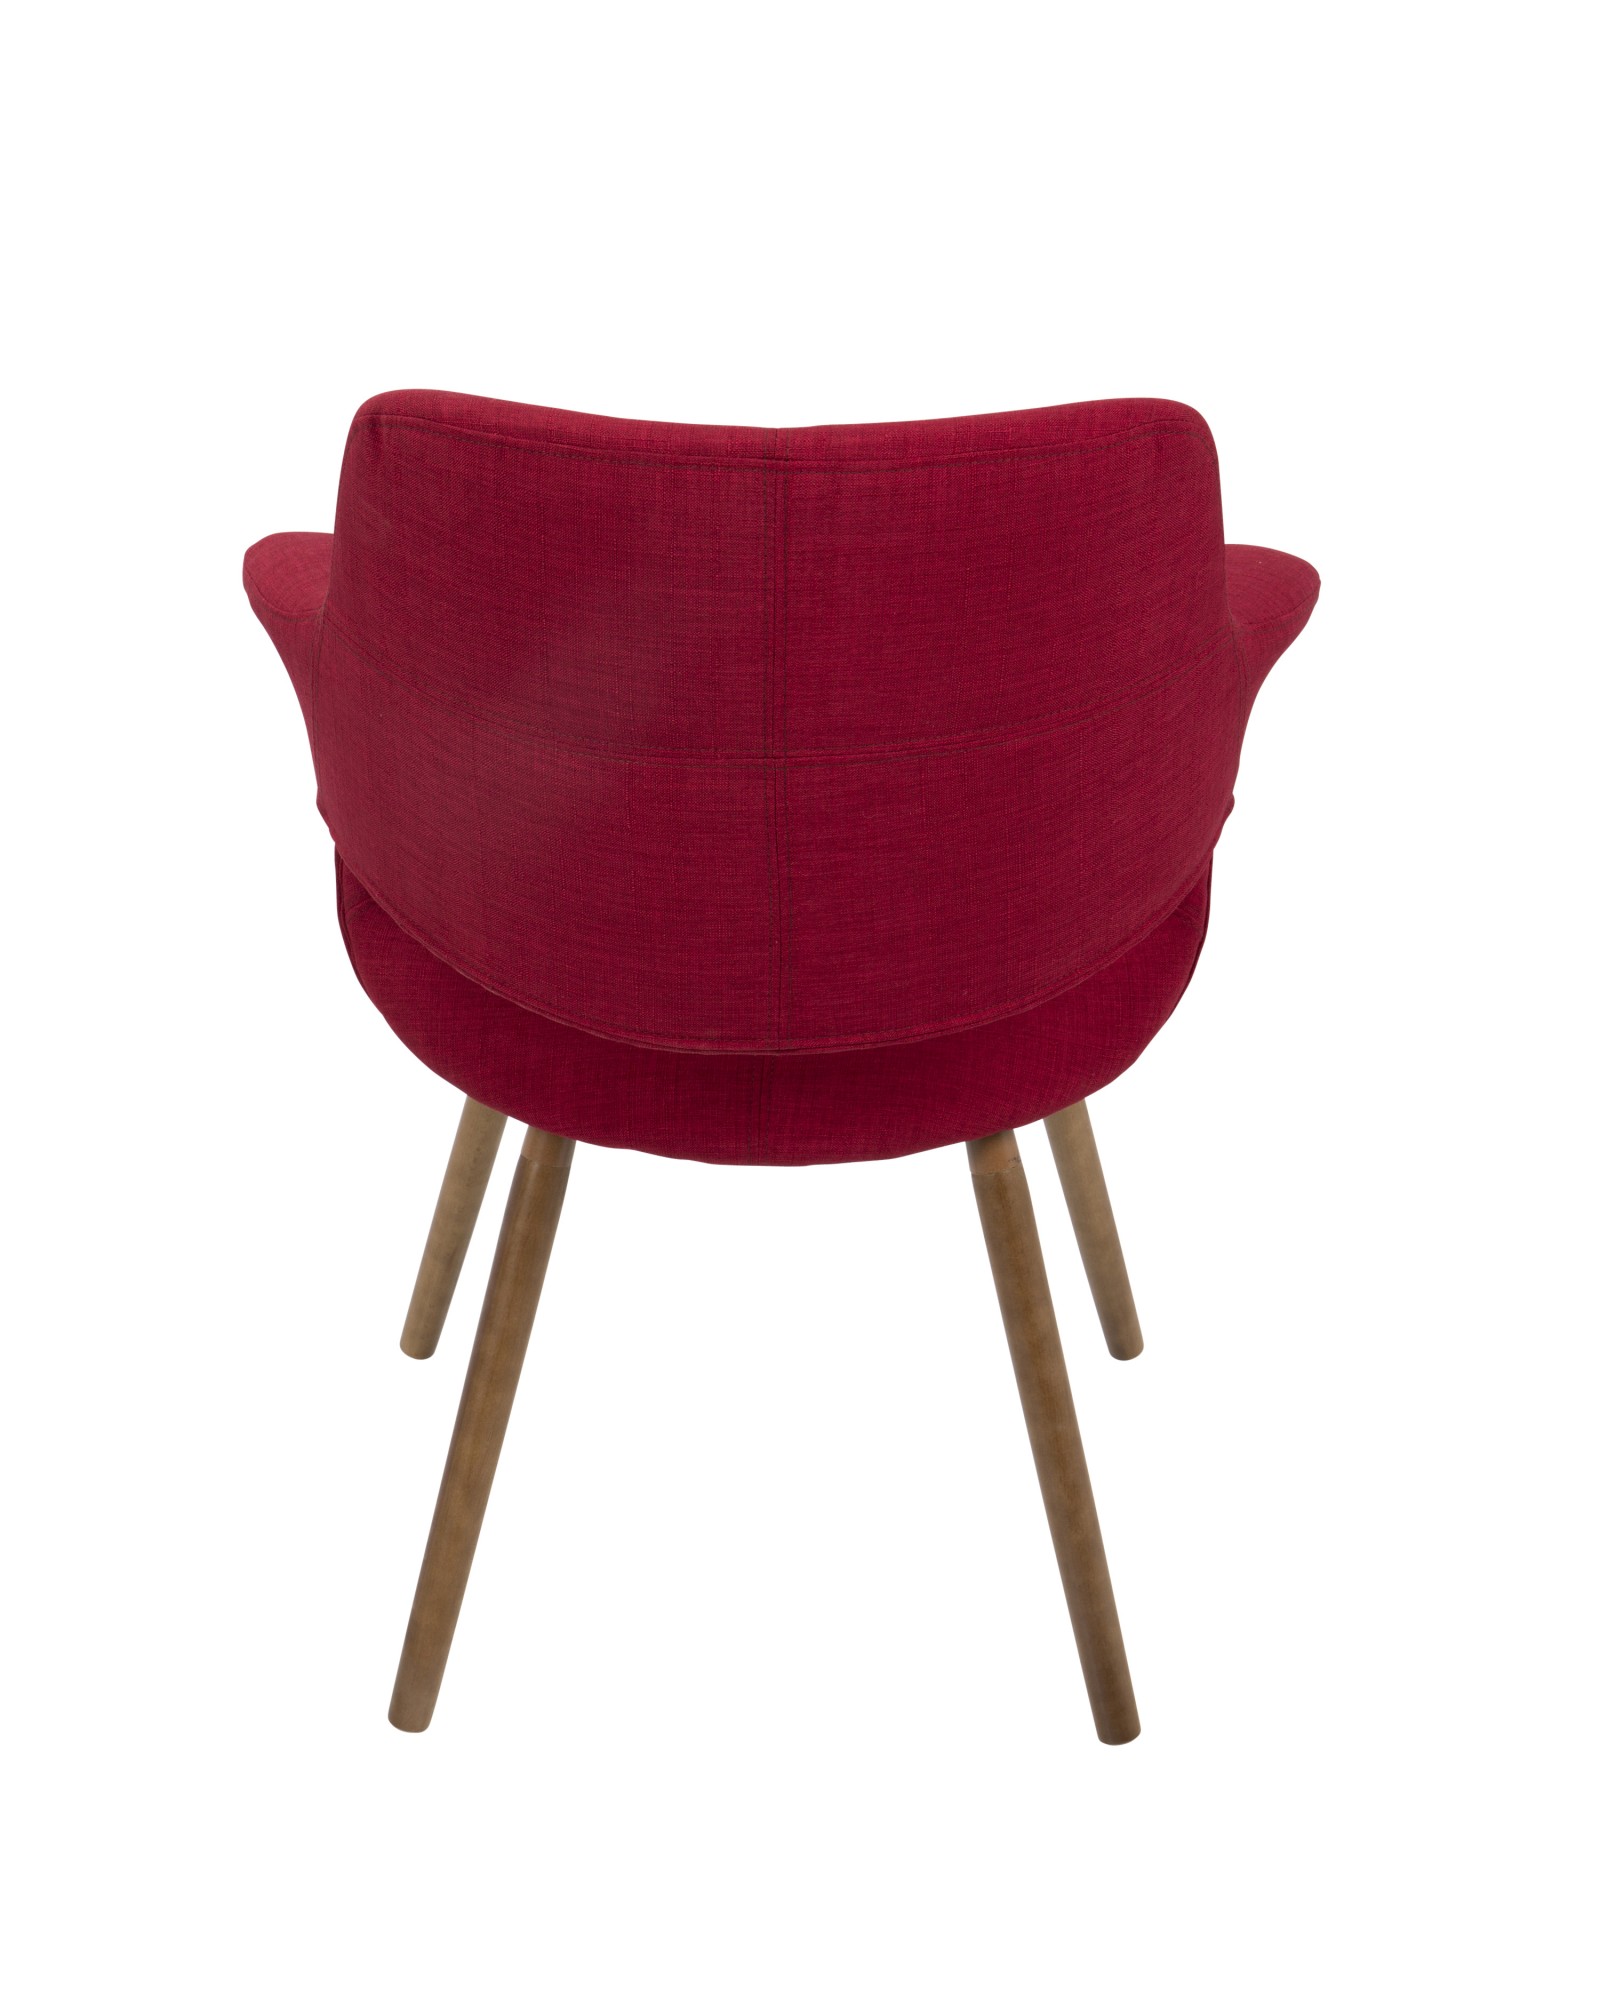 Vintage Flair Mid-Century Modern Chair in Red